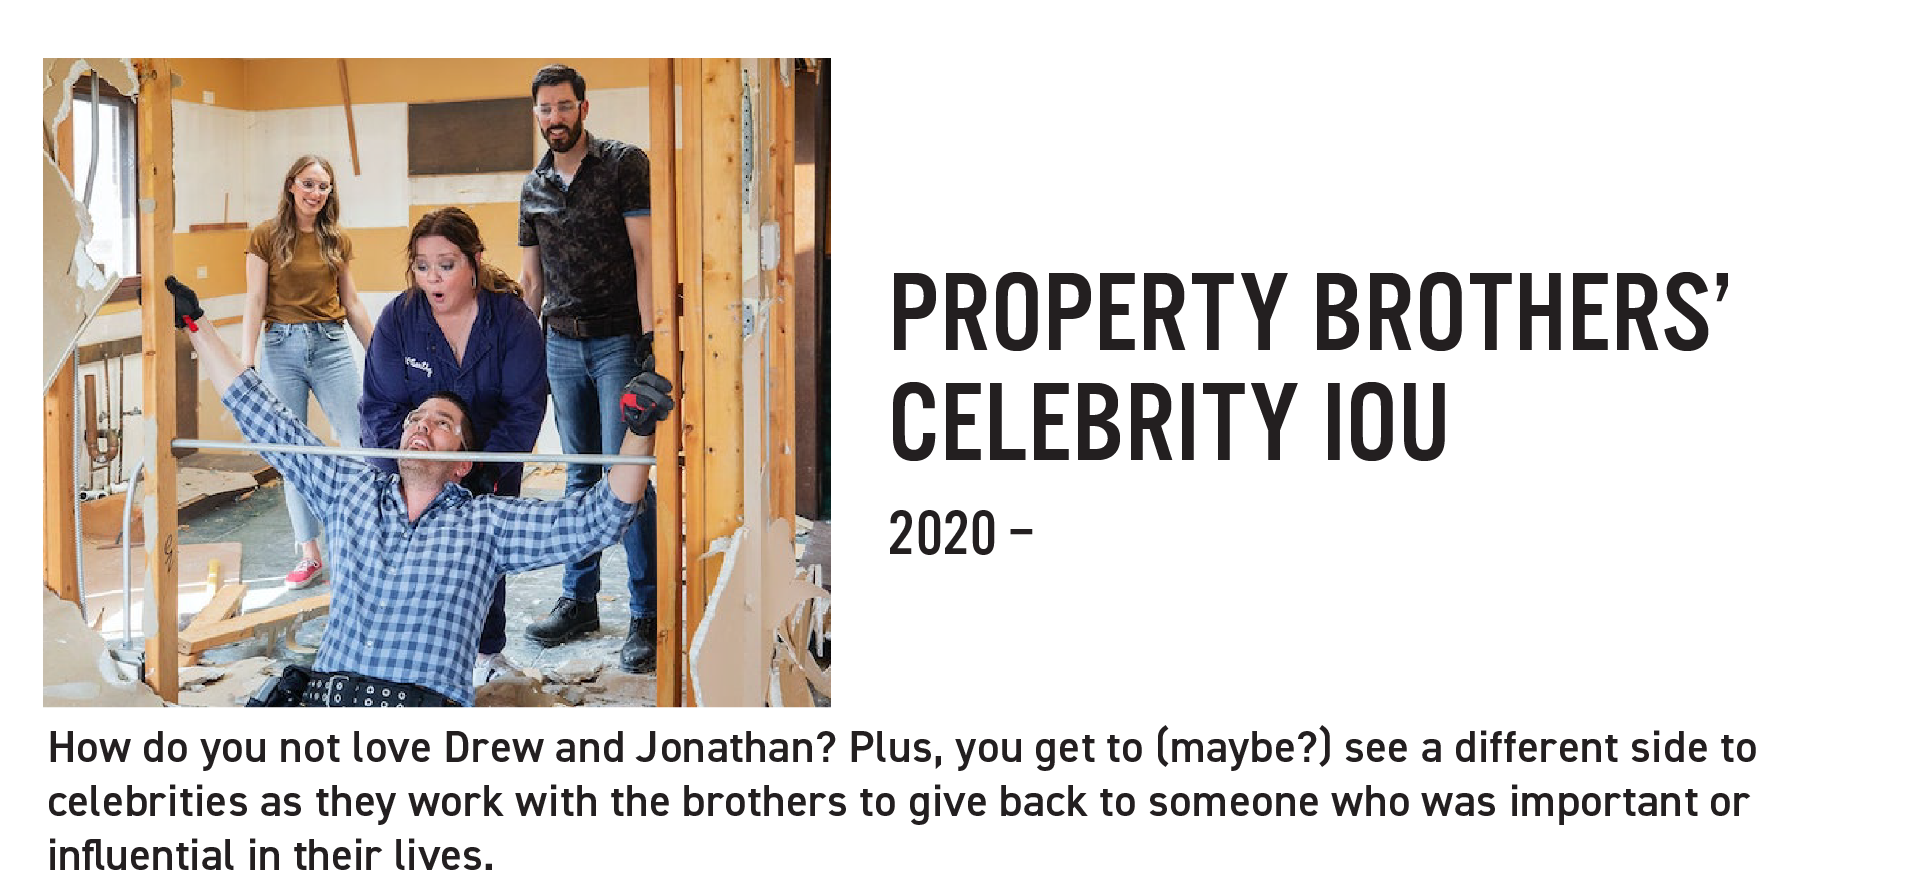 05 - Property Brothers